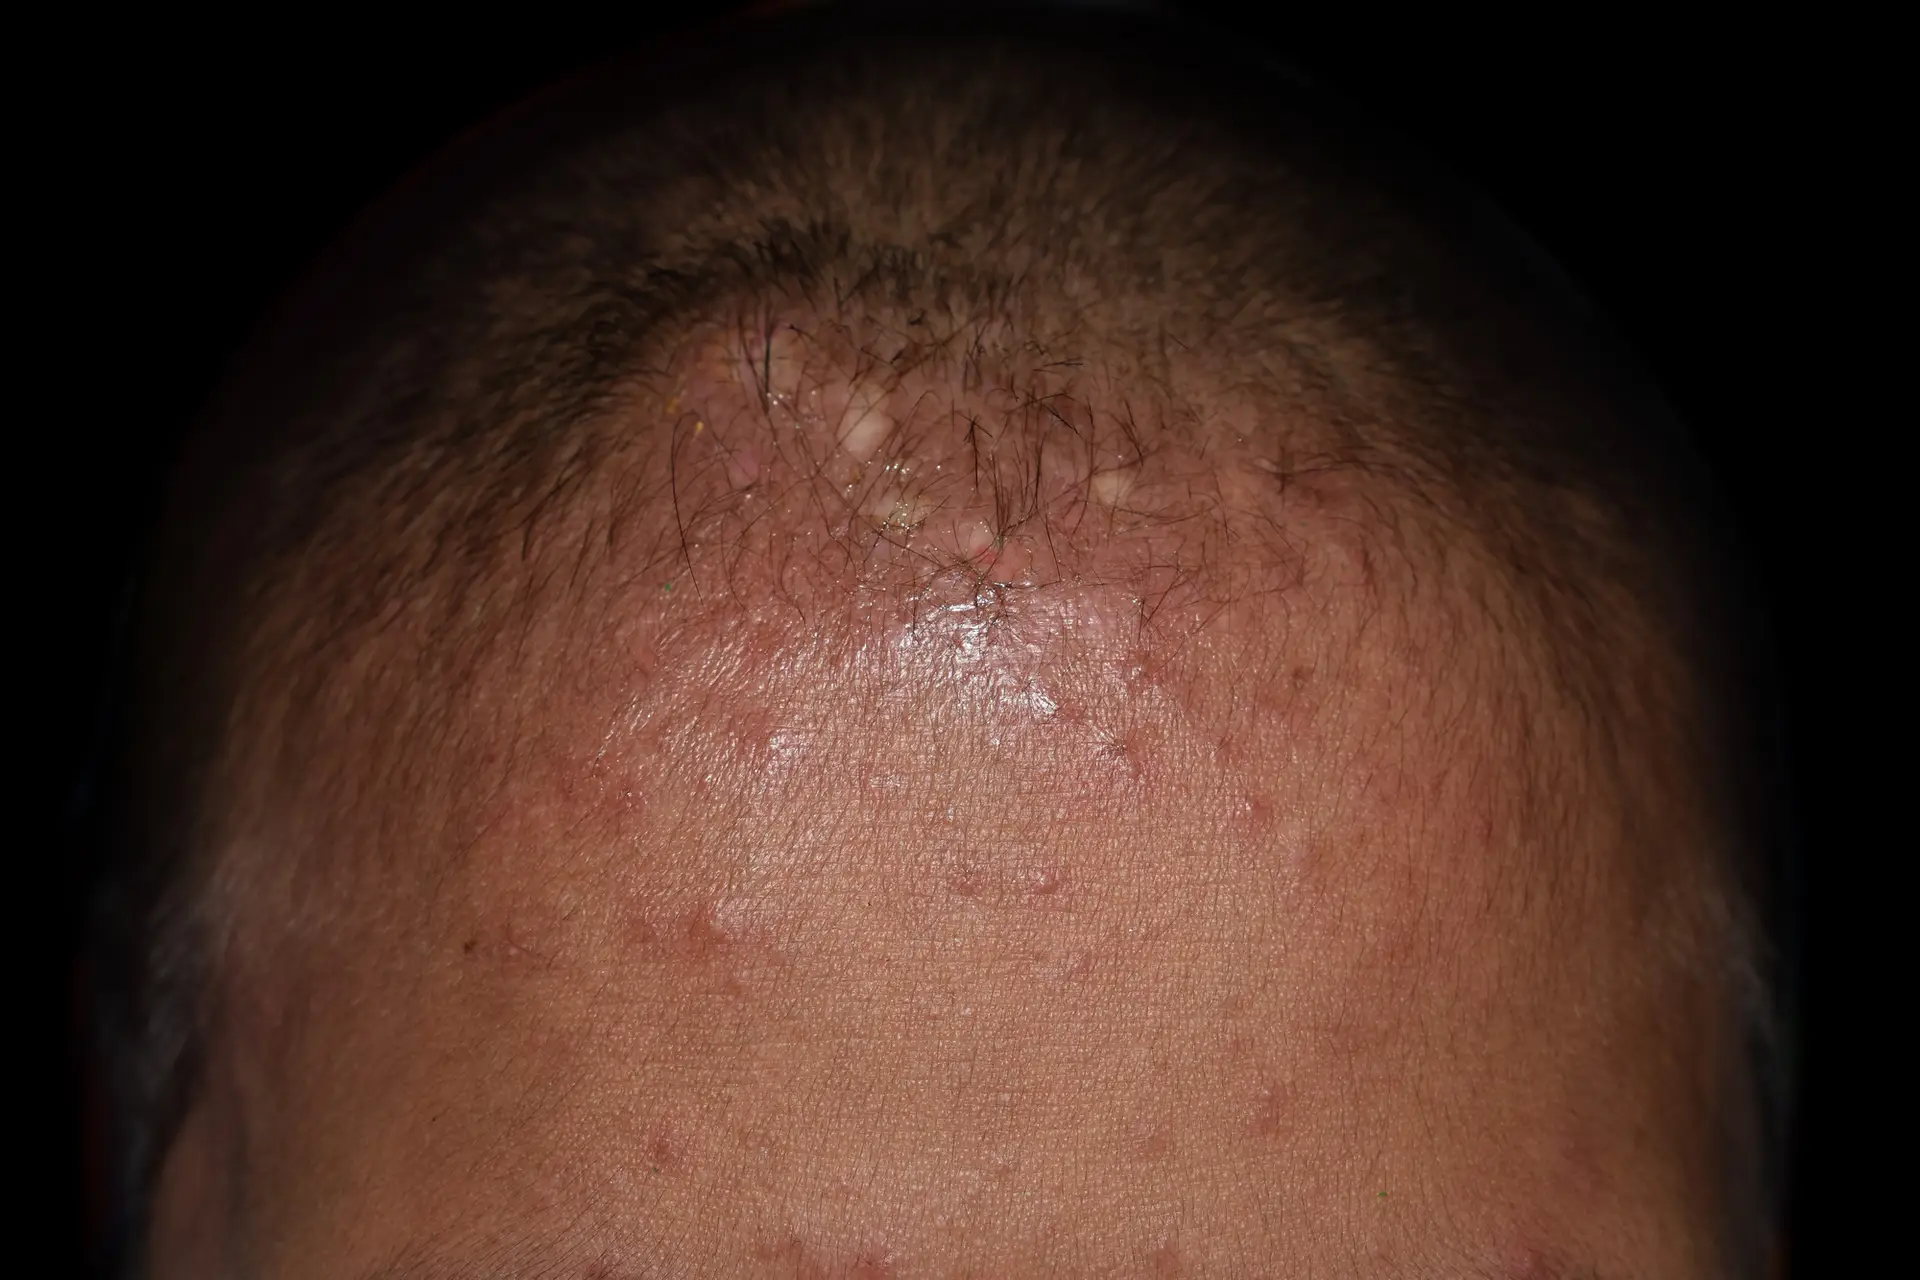 Small skin lesions on forehead